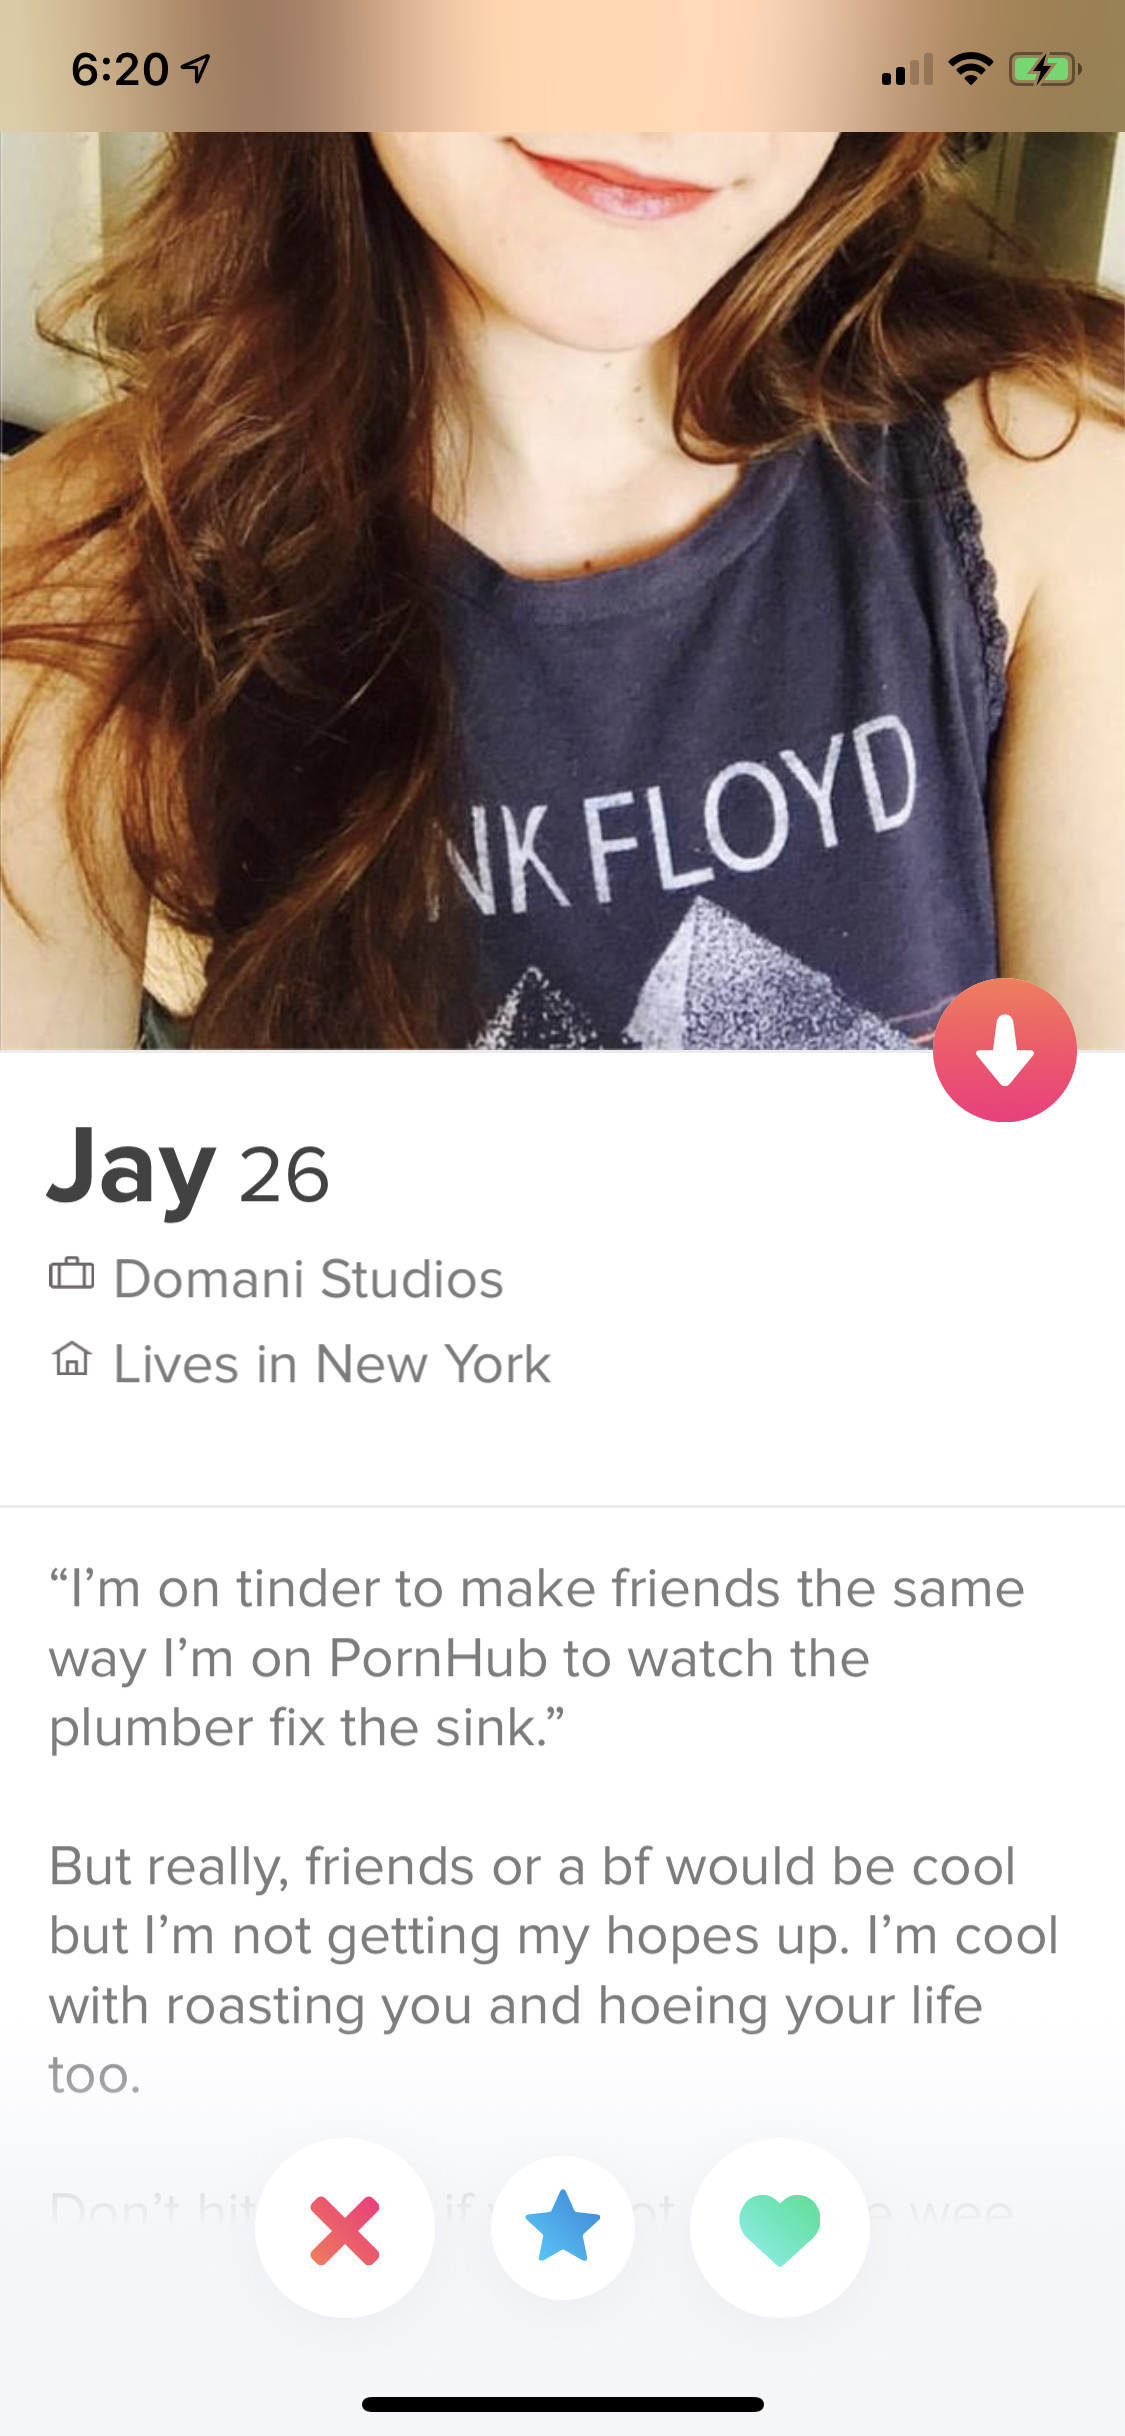 tinder wins and fails -Floyd Jay 26 Domani Studios A Lives in New York I'm on tinder to make friends the same way I'm on PornHub to watch the plumber fix the sink. But really, friends or a bf would be cool but I'm not getting my hopes up. I'm cool with ro